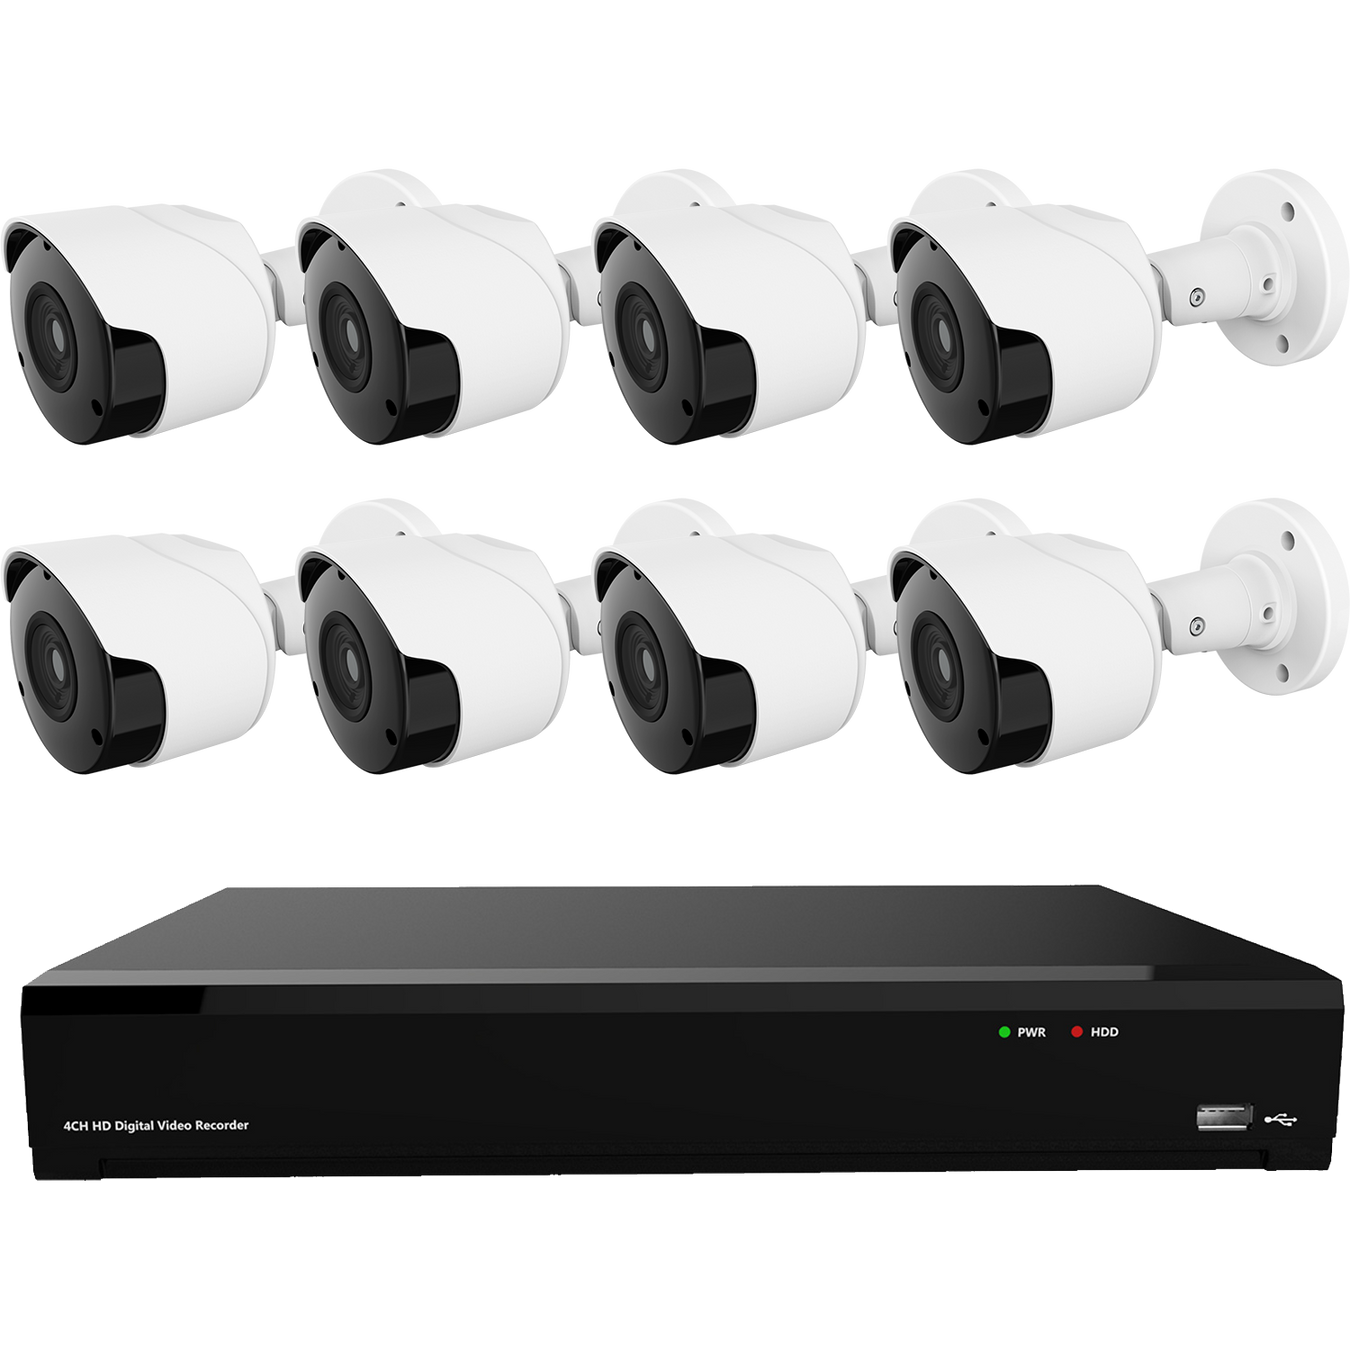 HD CCTV Camera System For Enhance Security